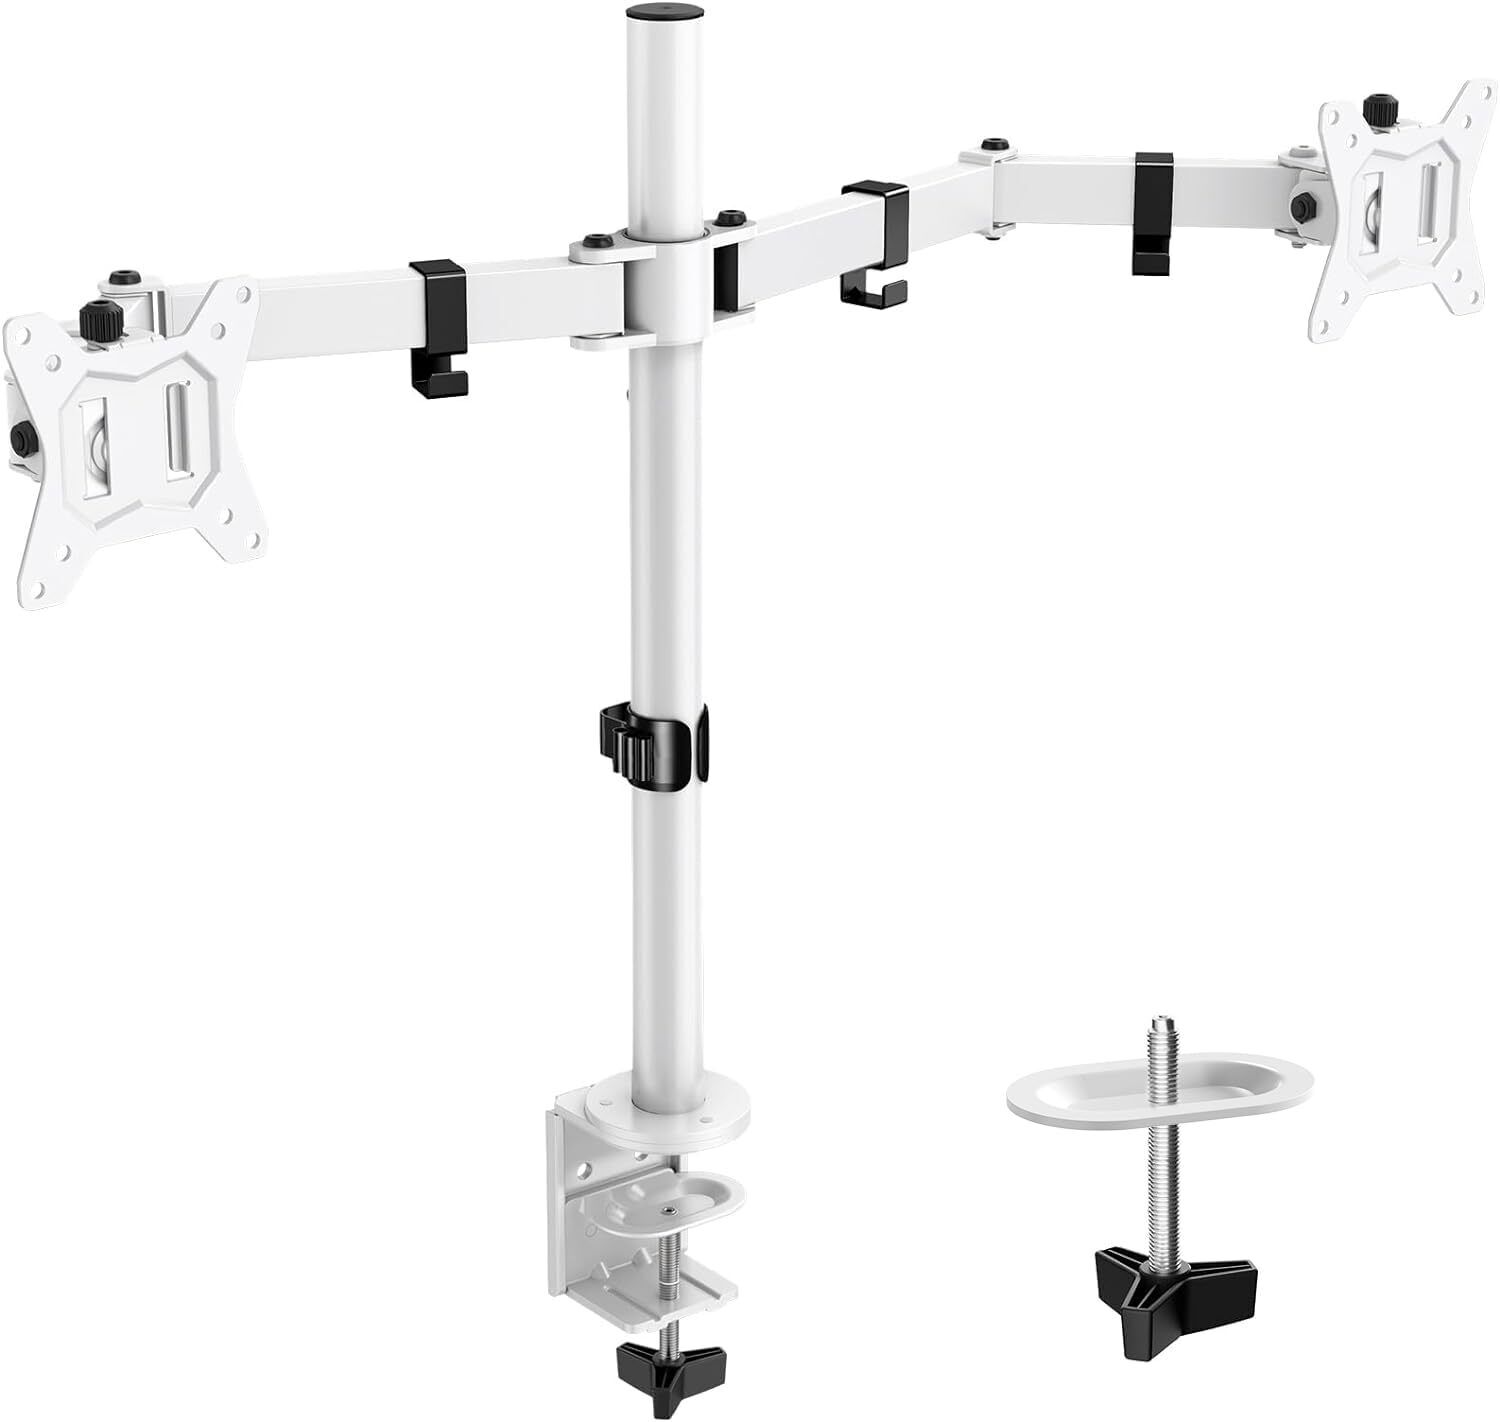 ErGear Dual Monitor Mount for Desk Fully Adjustable Dual Monitor Arm Fits 2 C...